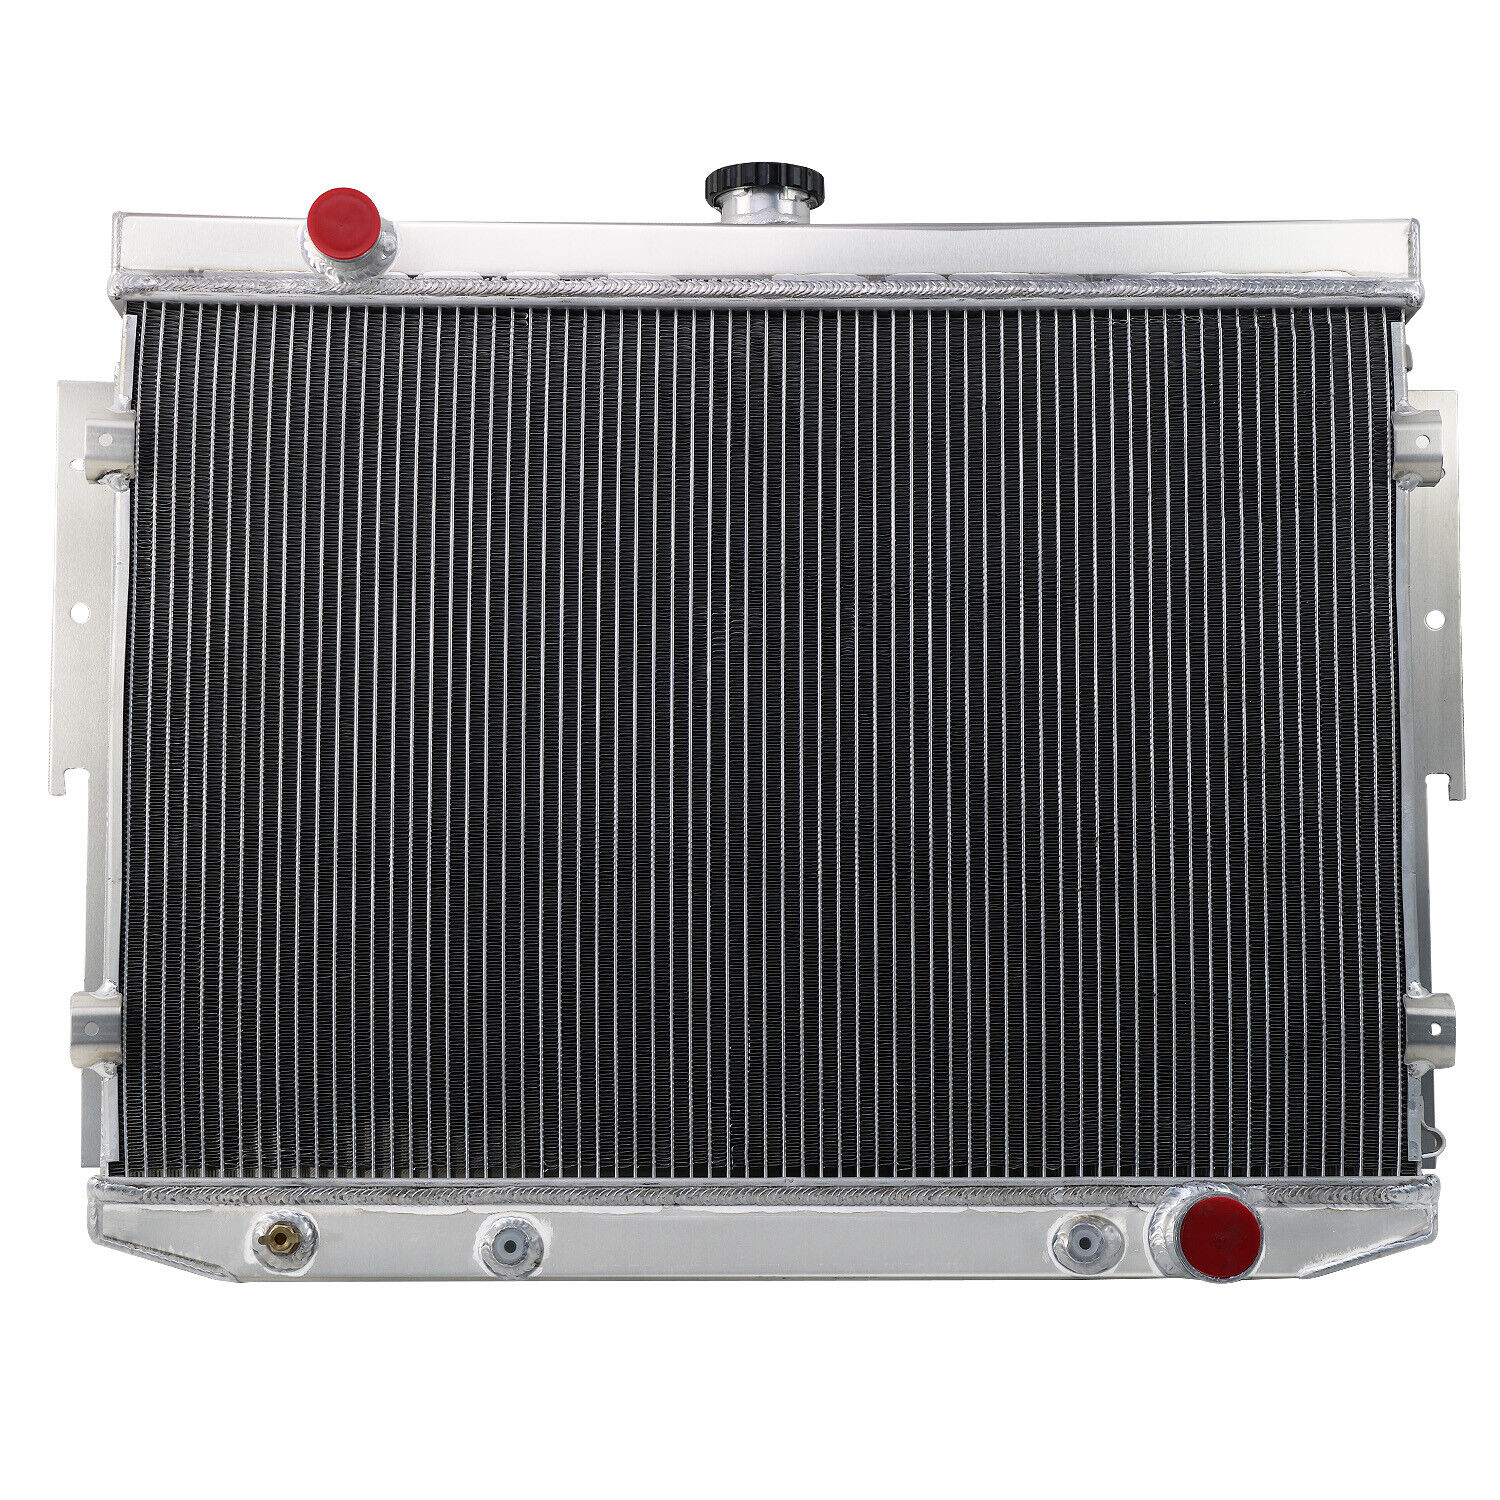 ALLOY 3 Row Radiator For 1973-1974 Dodge CORONET CHARGER/PLYMOUTH SATELLITE 7.2L